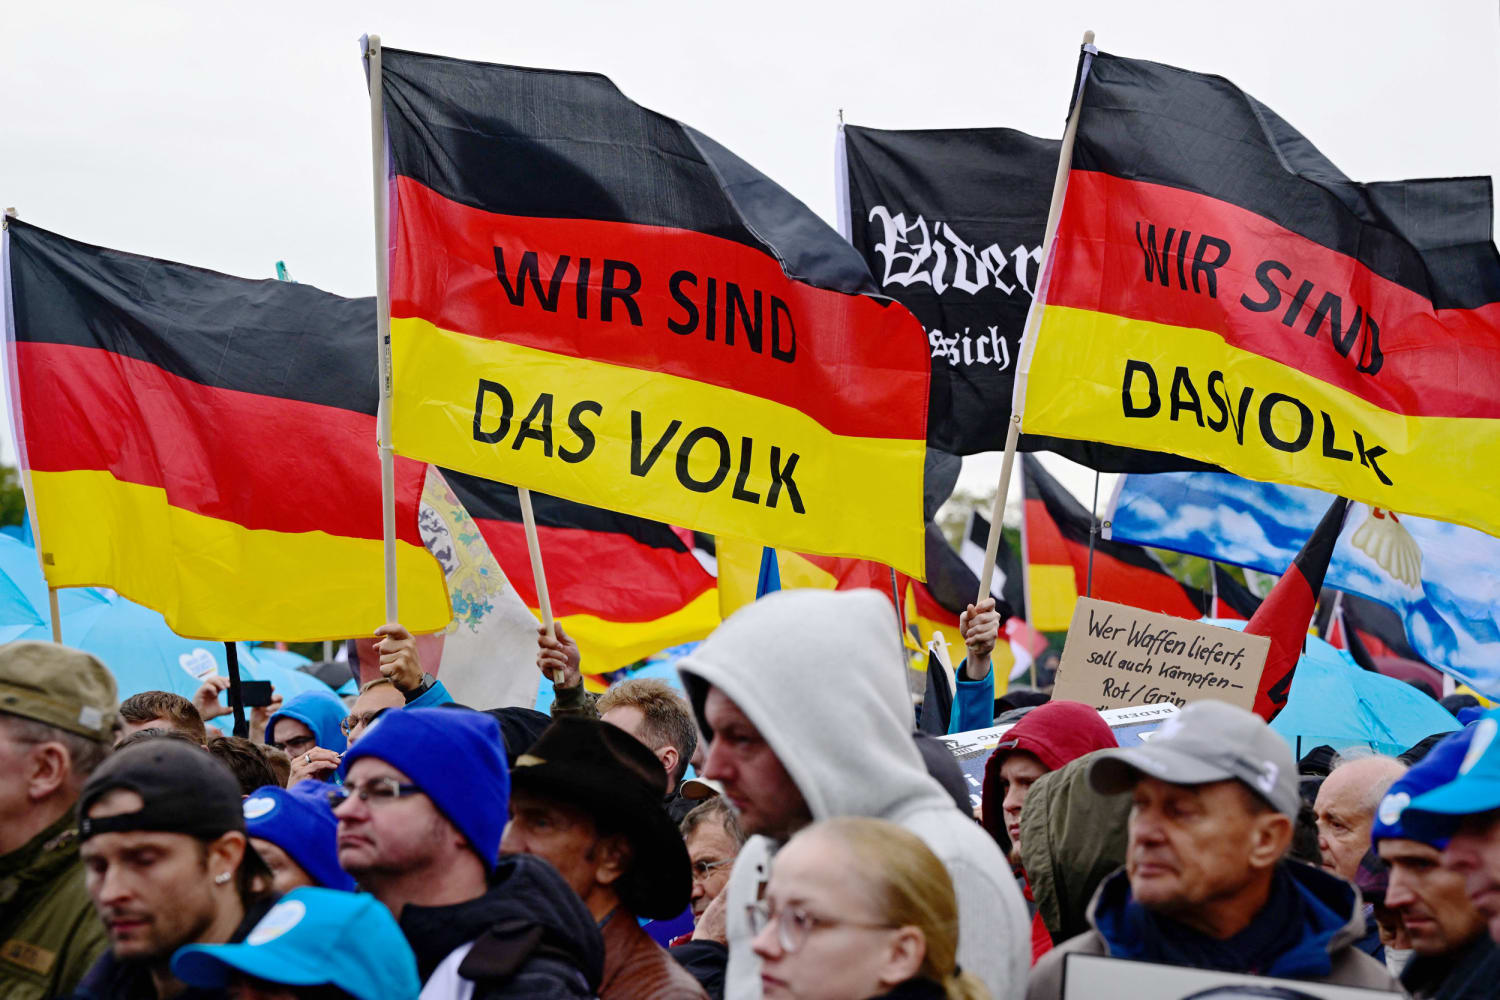 Amid a rise in politically motivated hate crimes, Germany cracks down on far-right